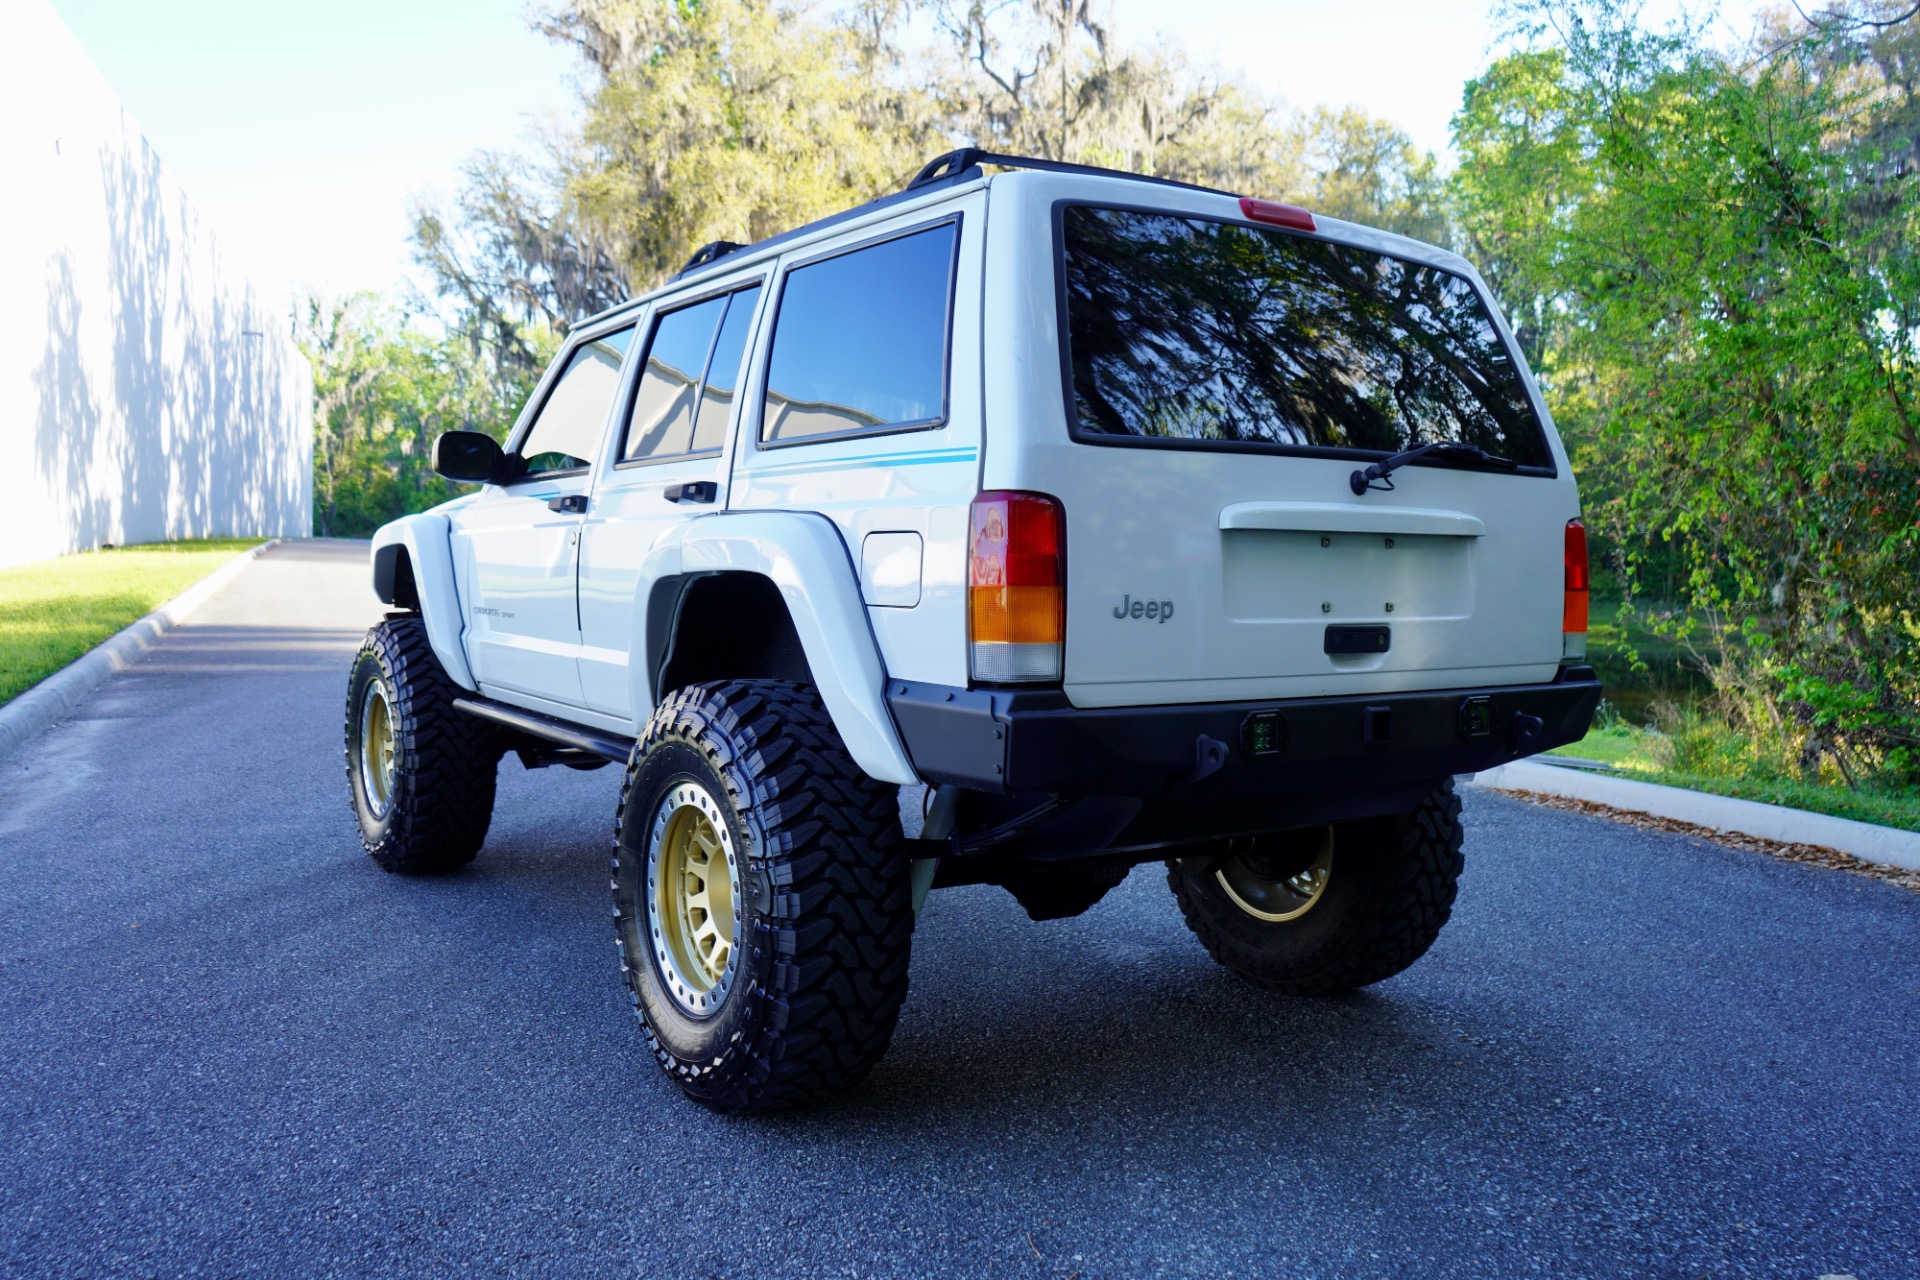 Used-1999-Jeep-Cherokee-SPORT-4X4-KCO-FRESH-BUILD-SPORT-1711215257-for-sale-03